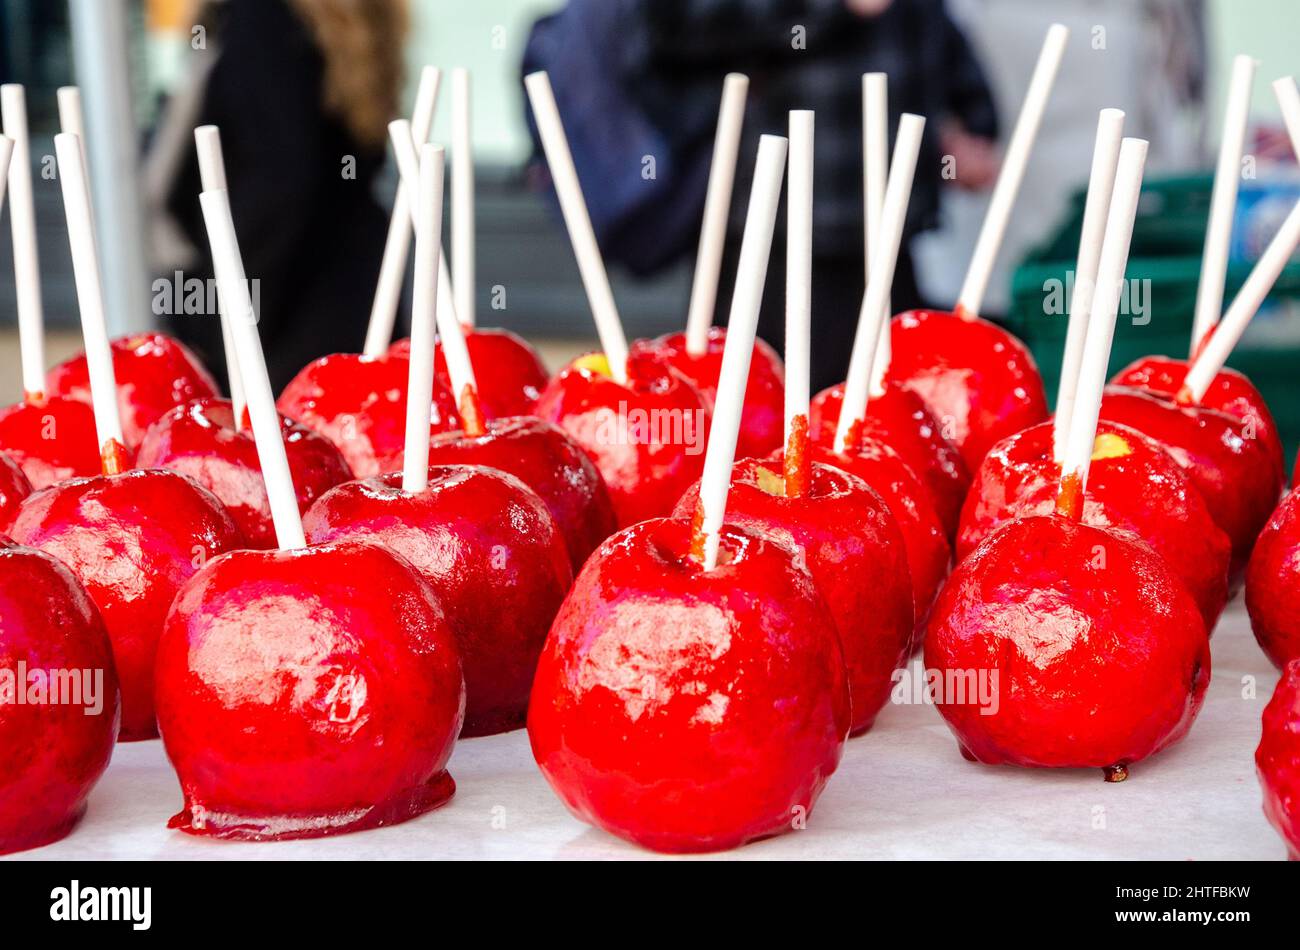 Red toffee apples on sticks on sale in a market Stock Photo